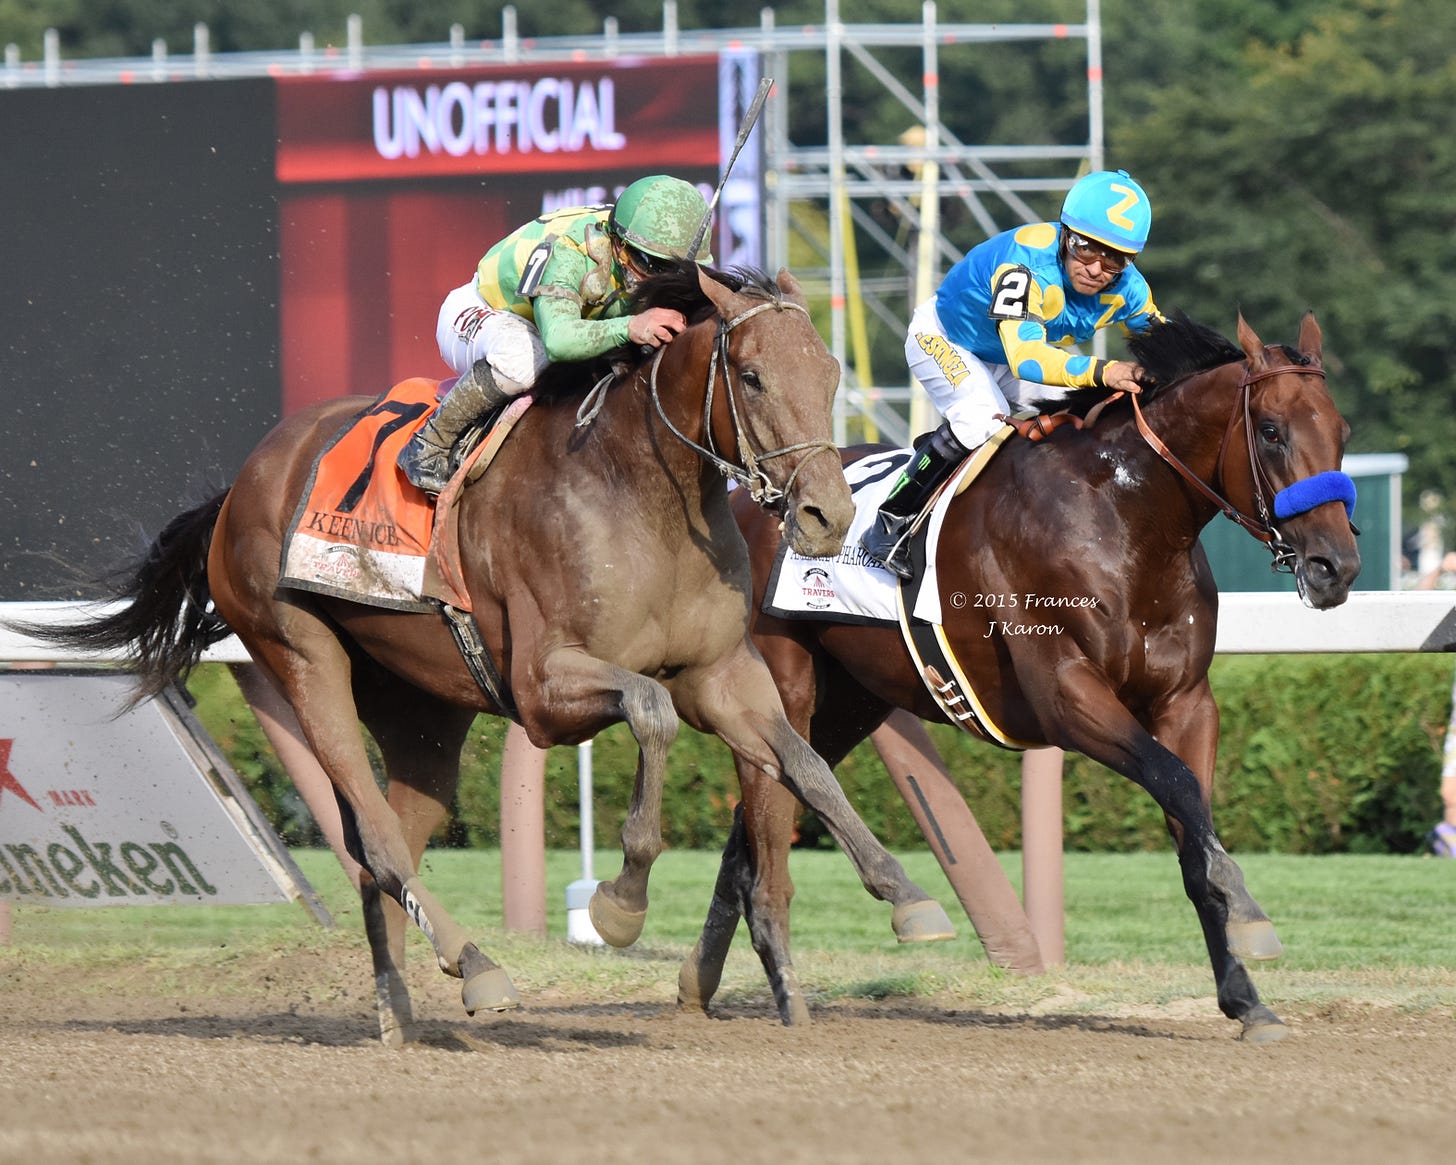 Curlin’s son Keen Ice (outside) defeating Triple Crown winner American Pharoah in the G1 Travers at Saratoga.